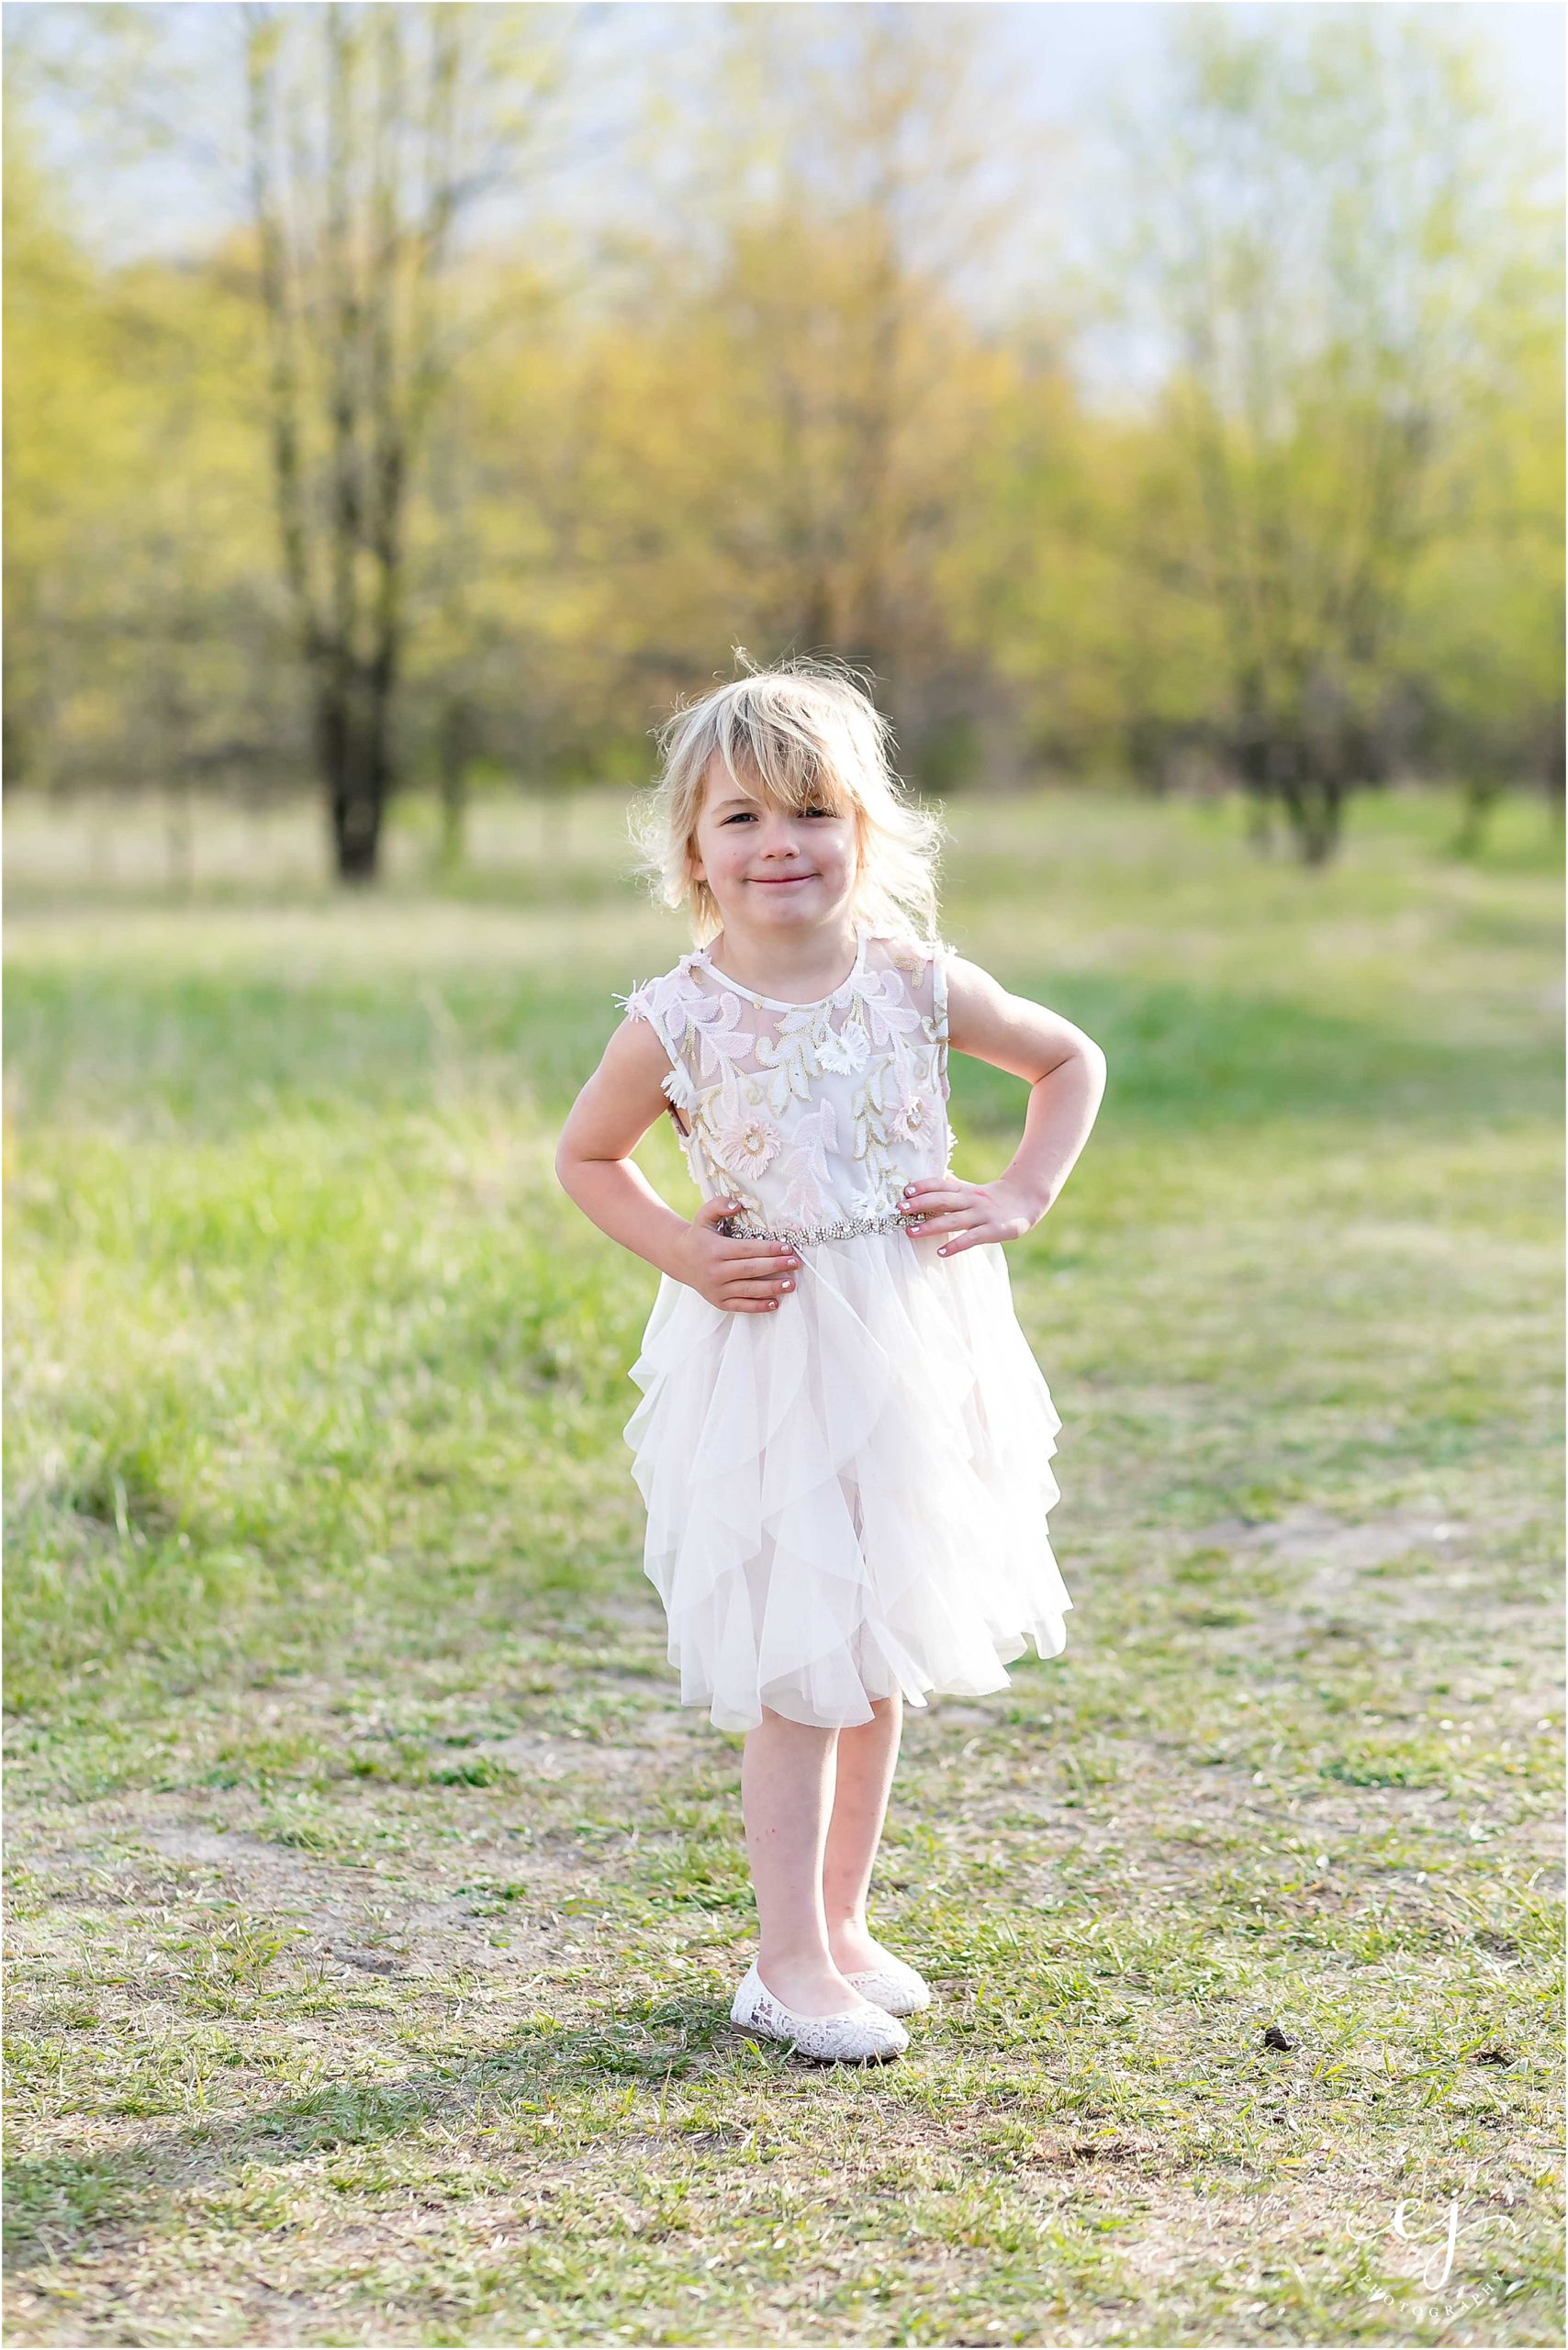 Little four-year-old girl dressed up for photos smiling at the camera and posing